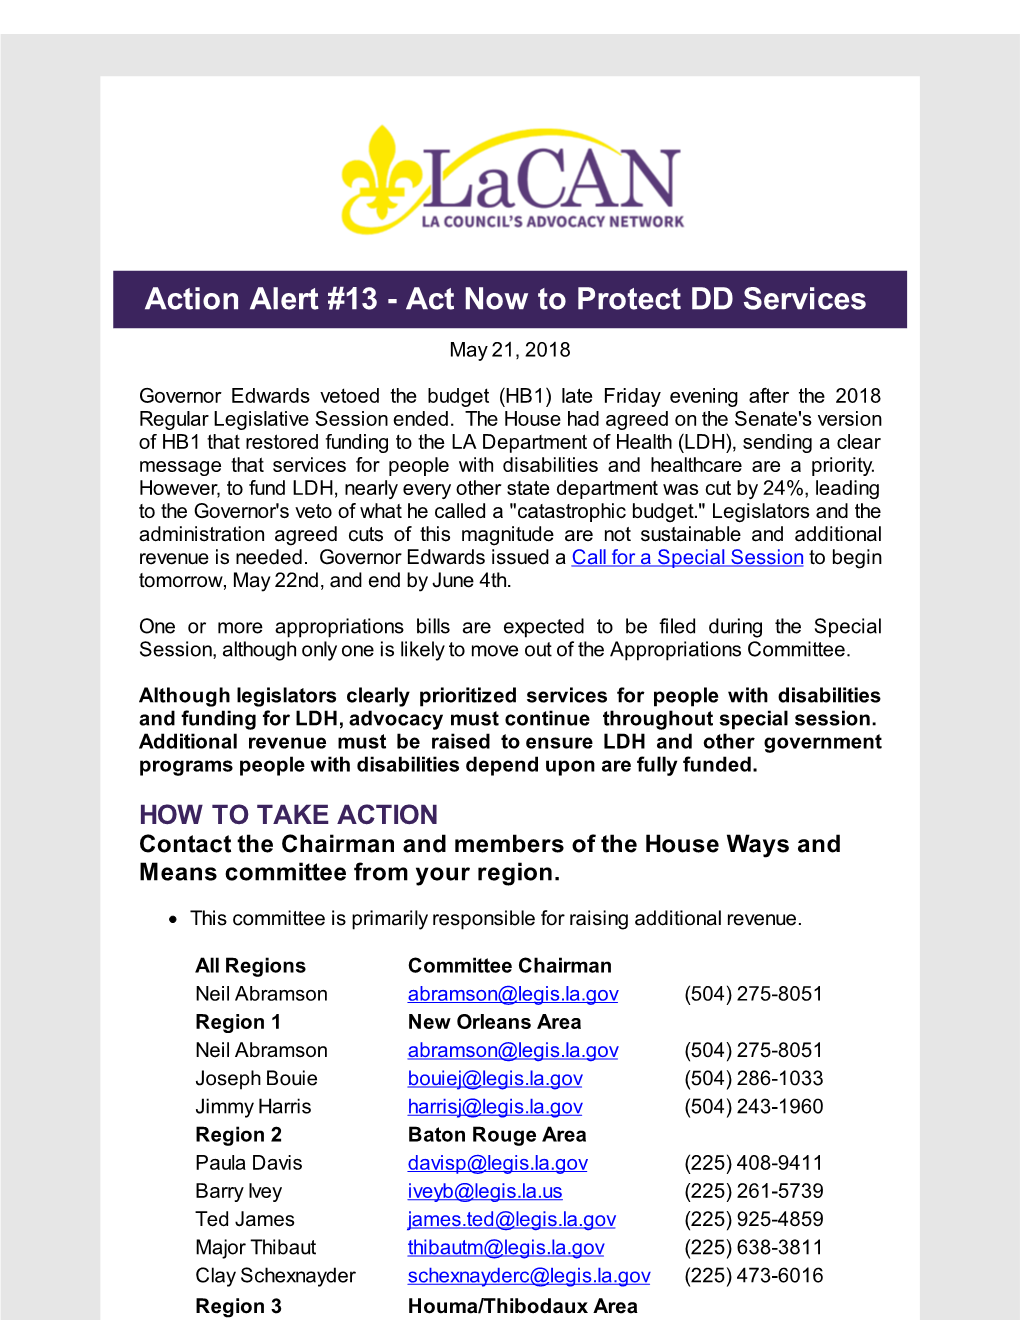 Action Alert #13 - Act Now to Protect DD Services